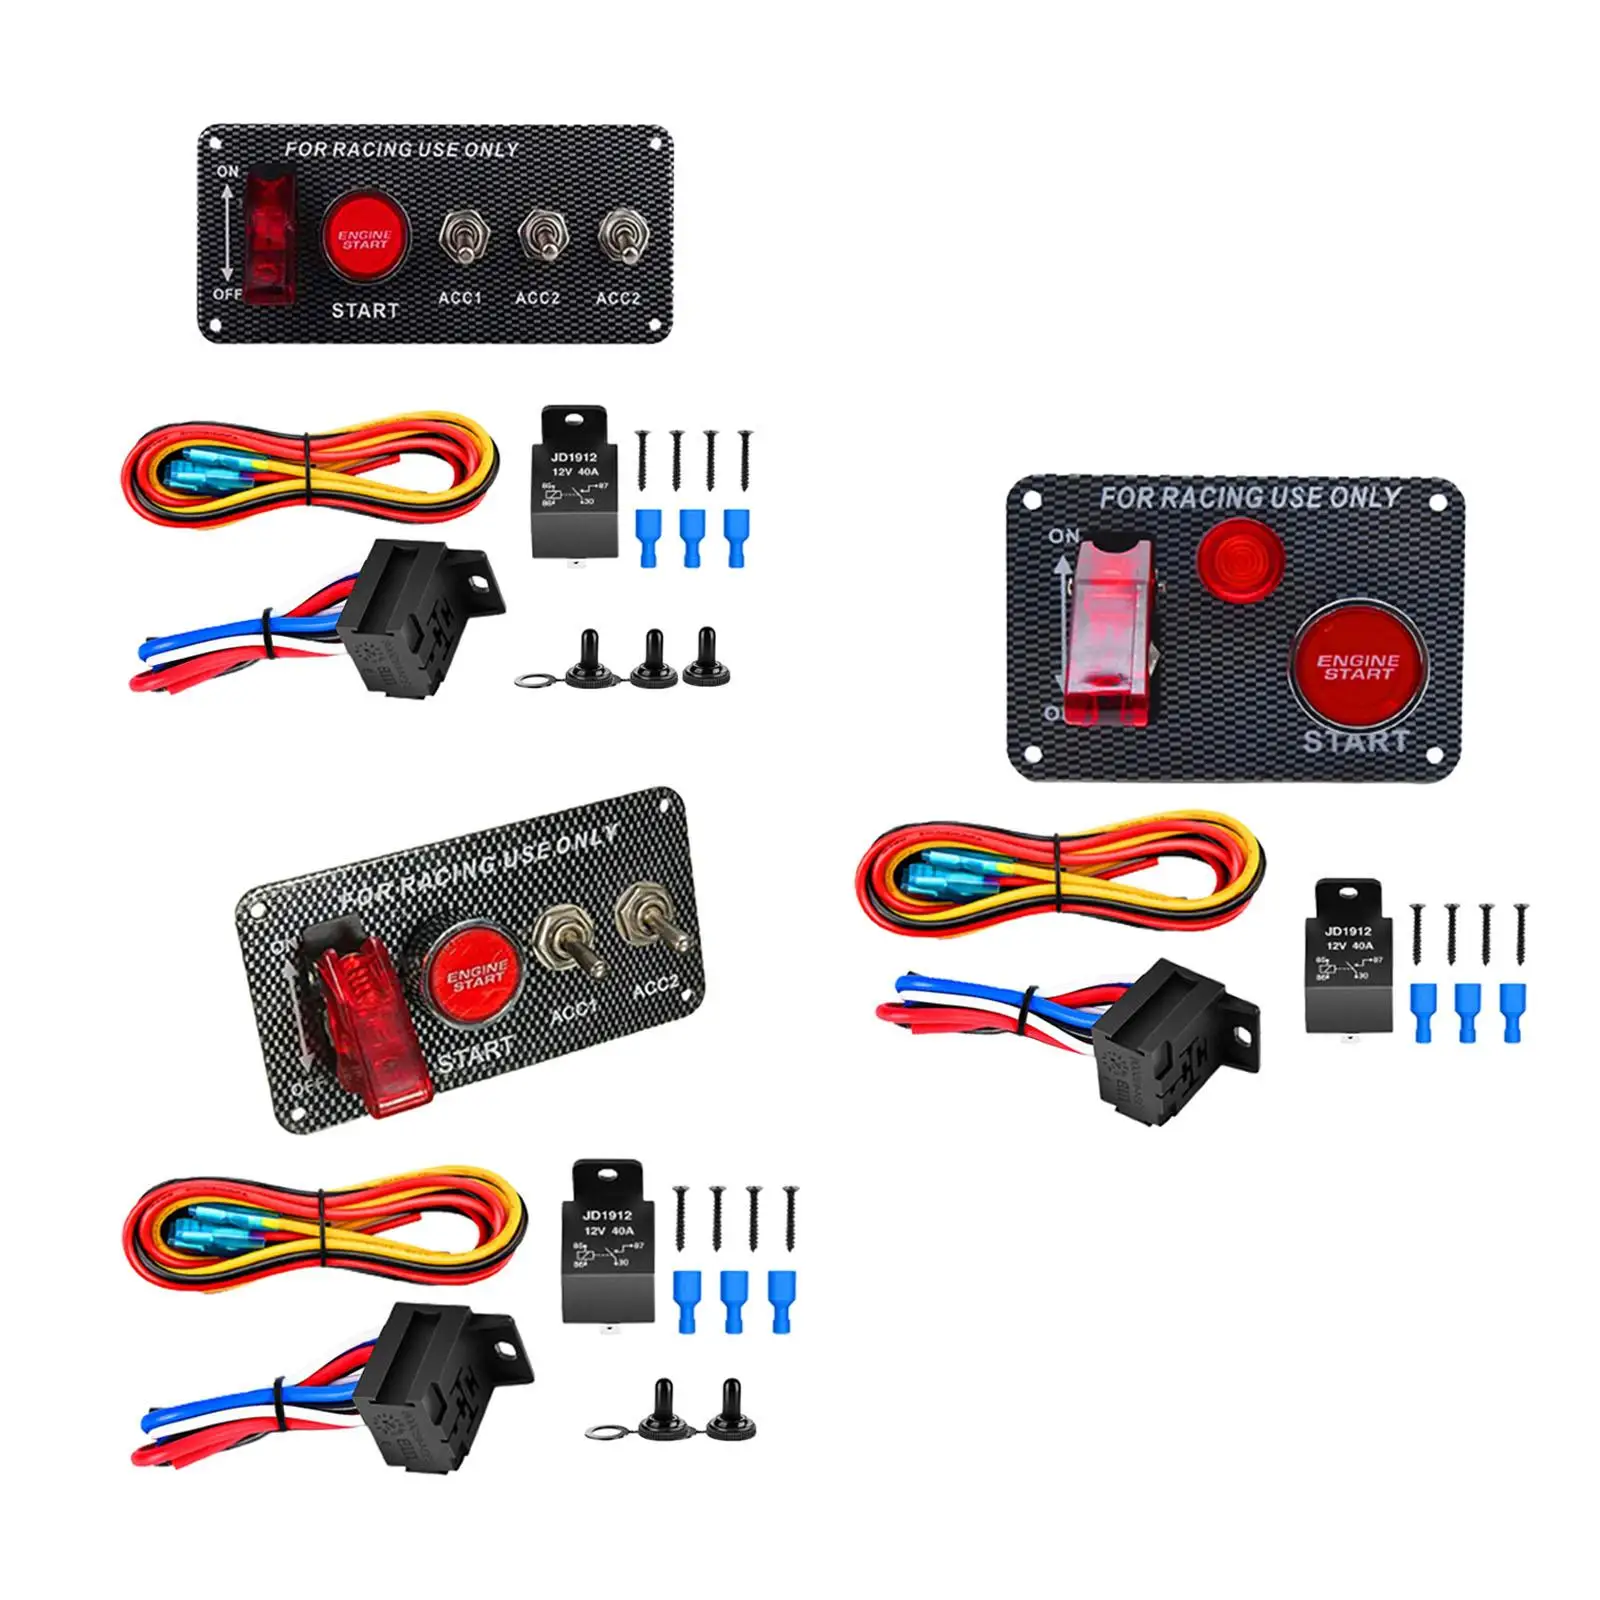 Ignition Key Switch Panel Durable Car Accessory Replacements for 12V Racing Vehicle Yachts Caravans Marine Outboard Boats